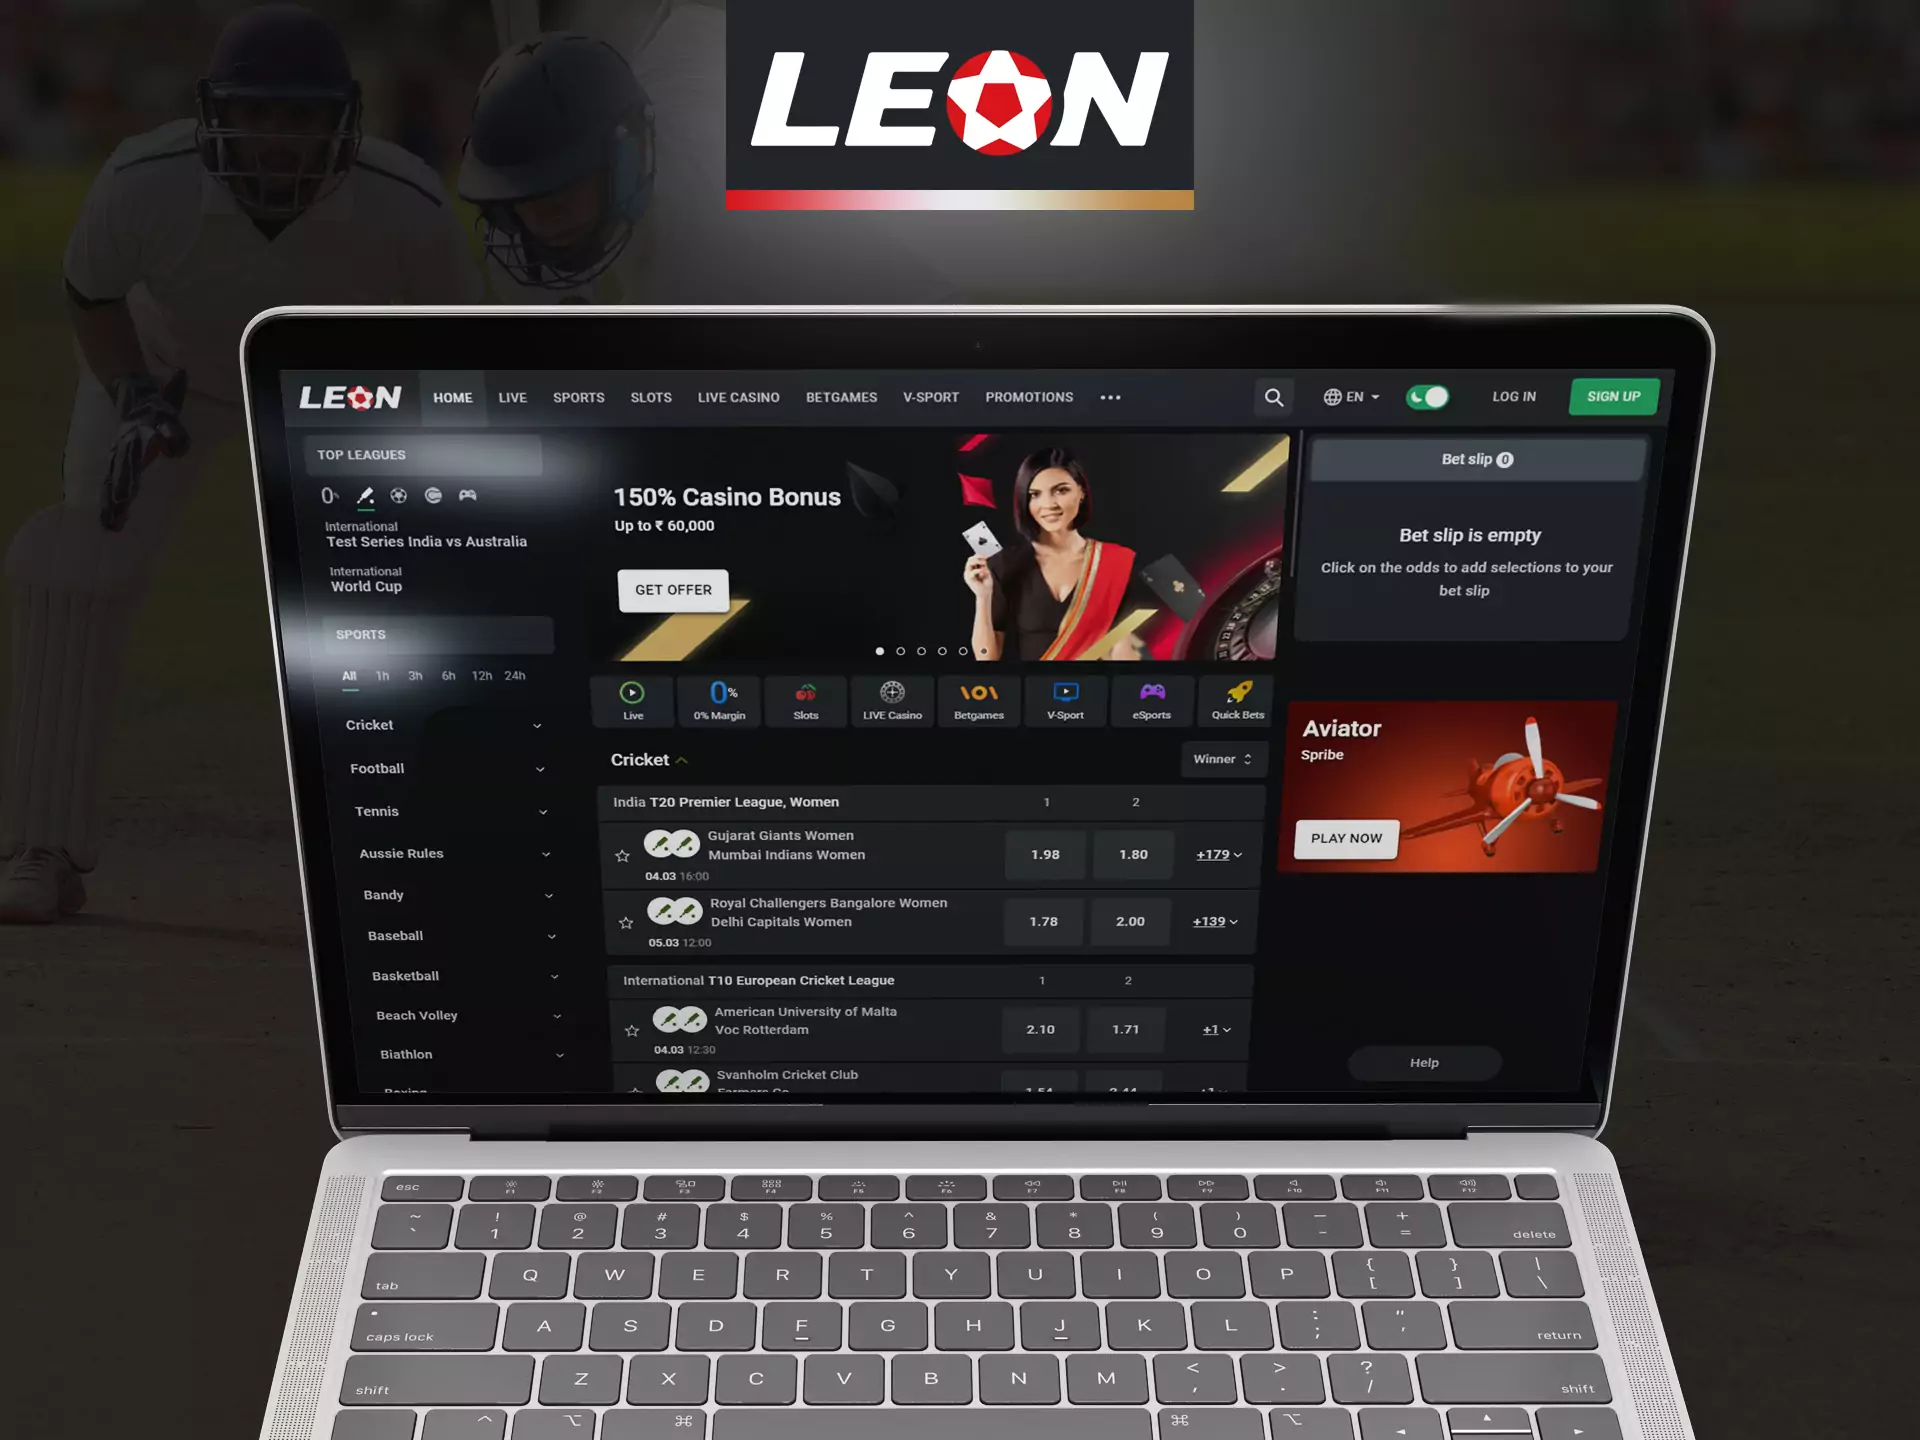 With Leonbet you can easily place bets and play casino games directly on your PC through the client.